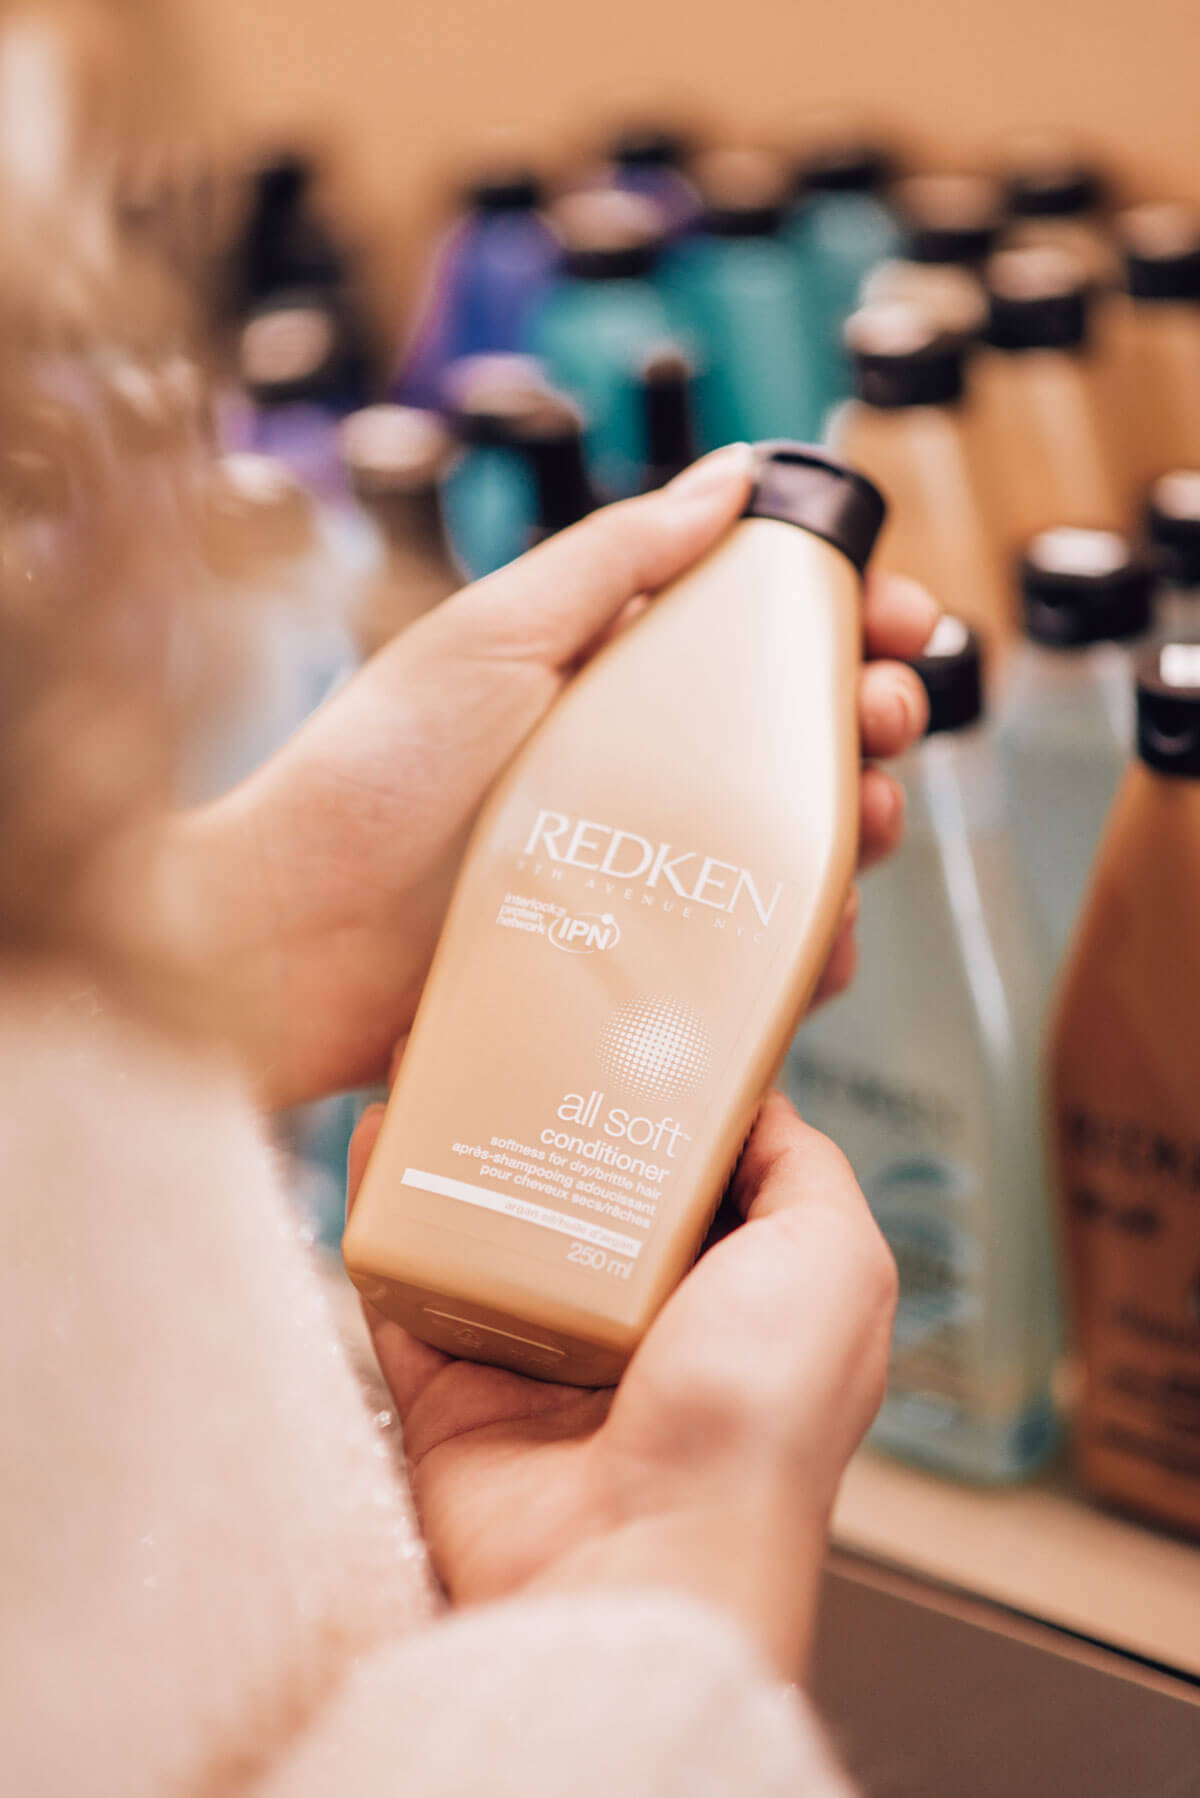 Redken All Soft review